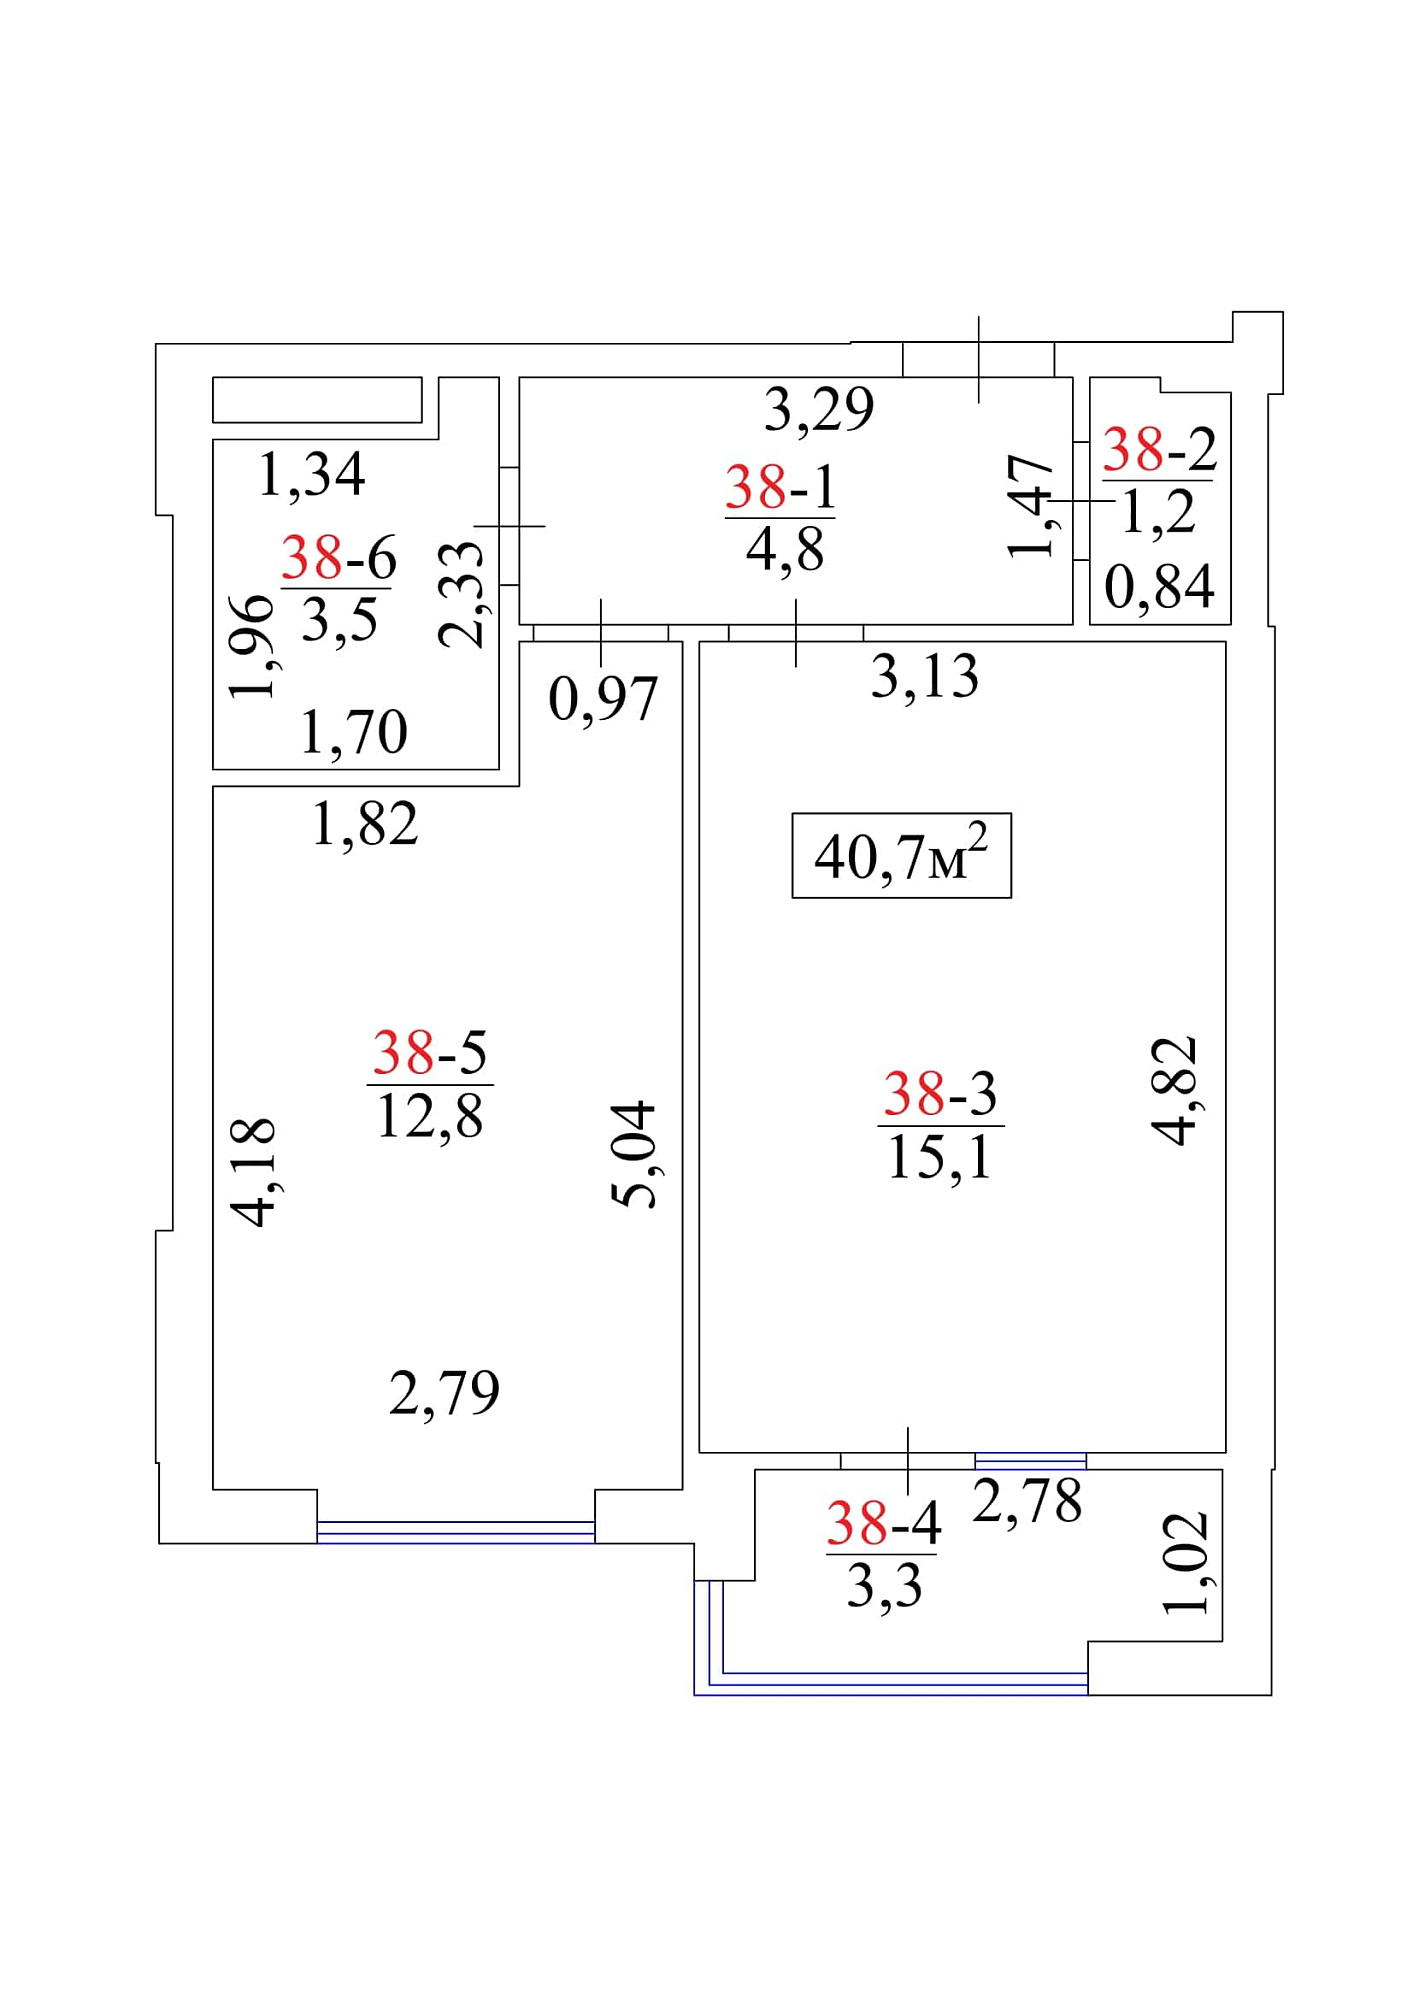 Planning 1-rm flats area 40.7m2, AB-01-05/00037.